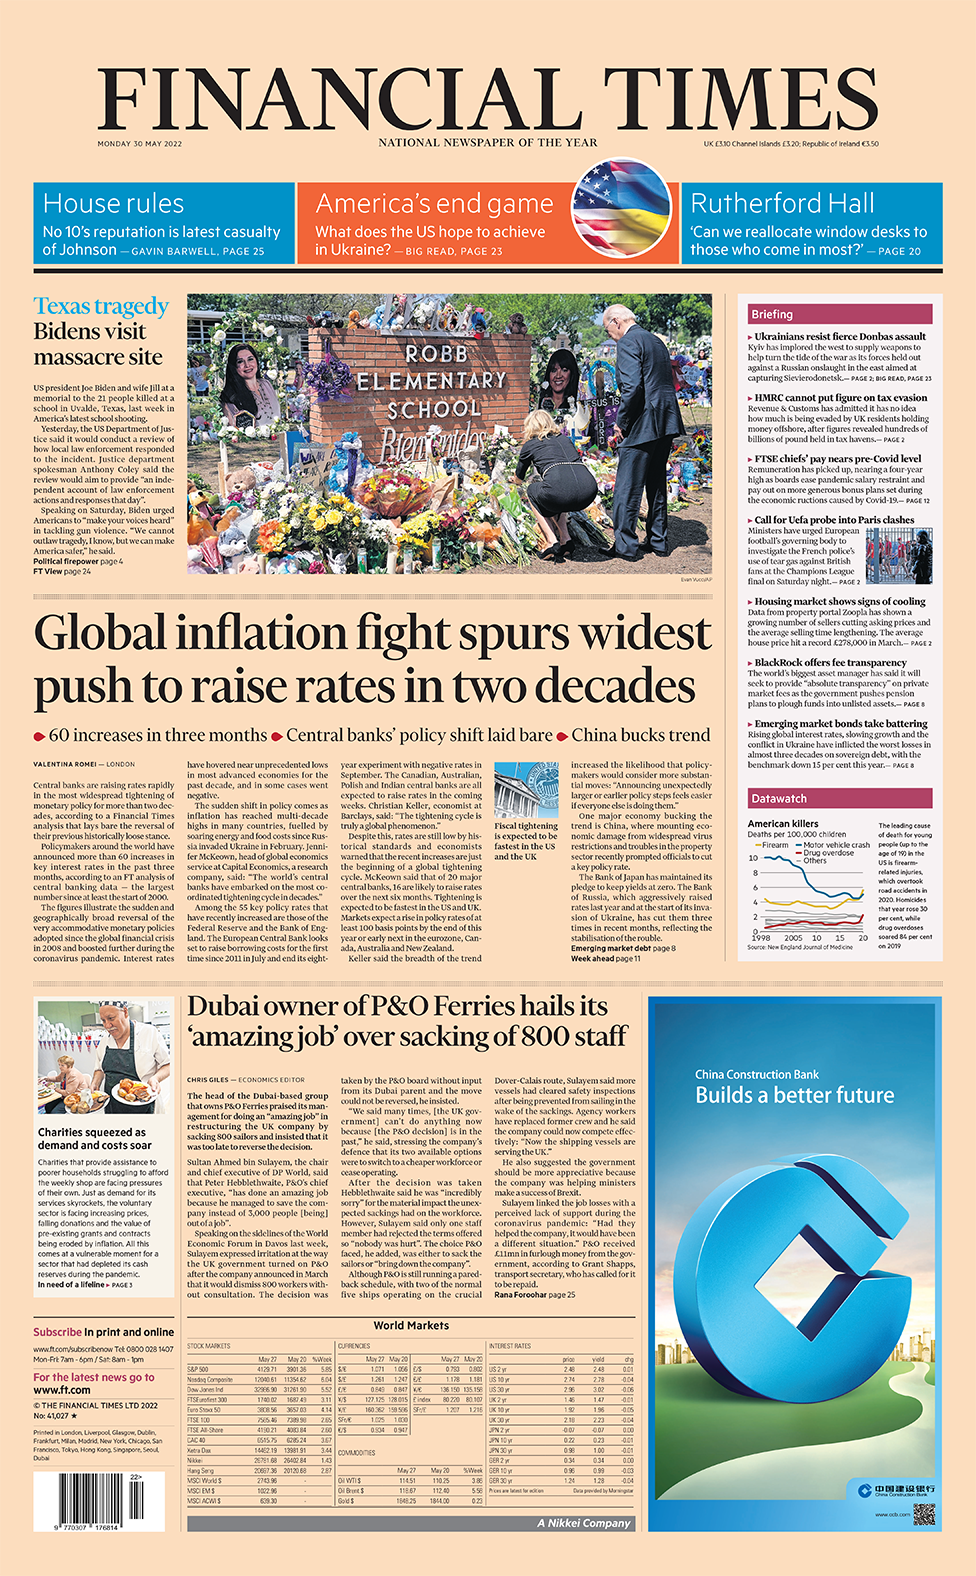 The headline in the Financial Times reads 'Global inflation fight spurs widest push to rates in two decades'